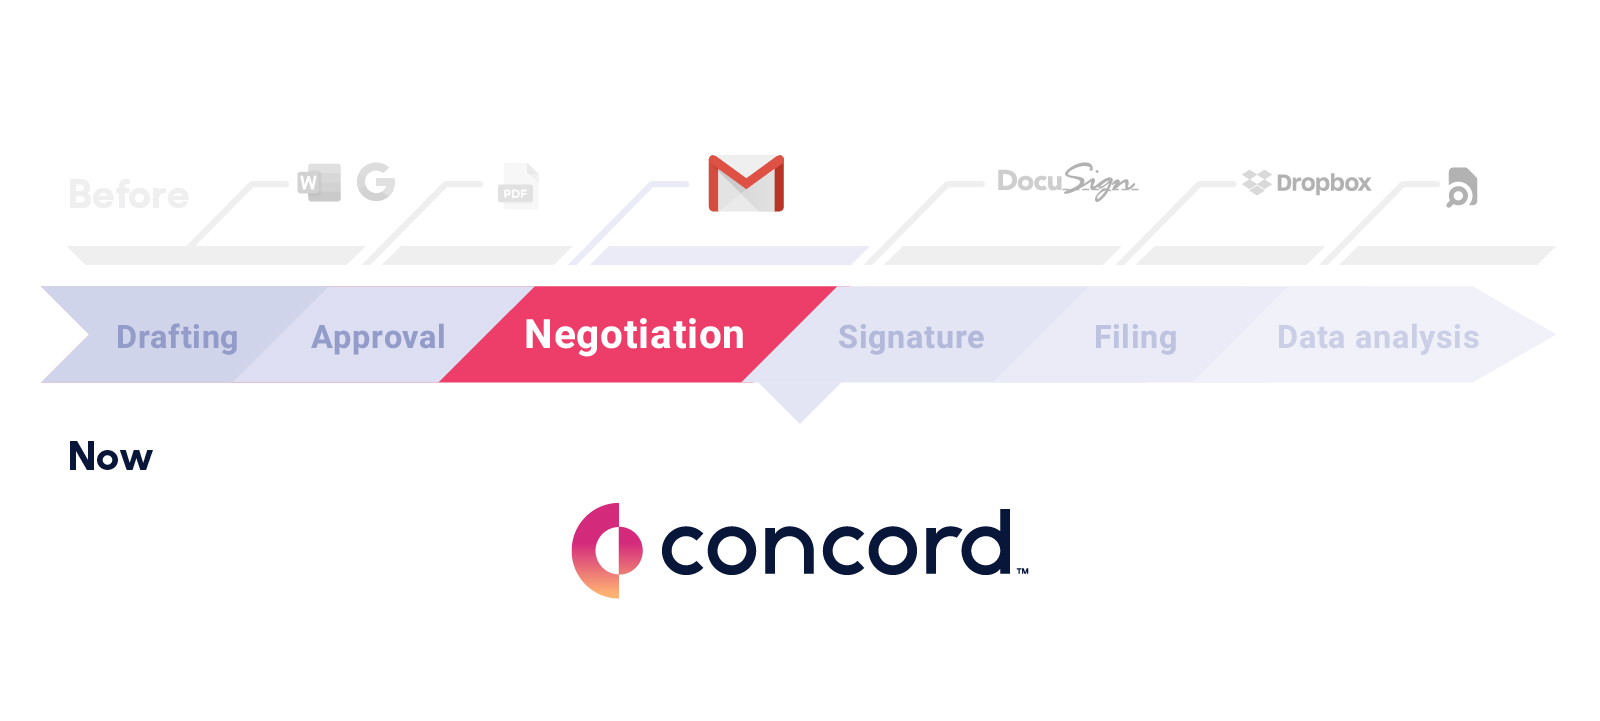 The third stage of the contract lifecycle is negotiation and conducting contract redlines with the other parties.